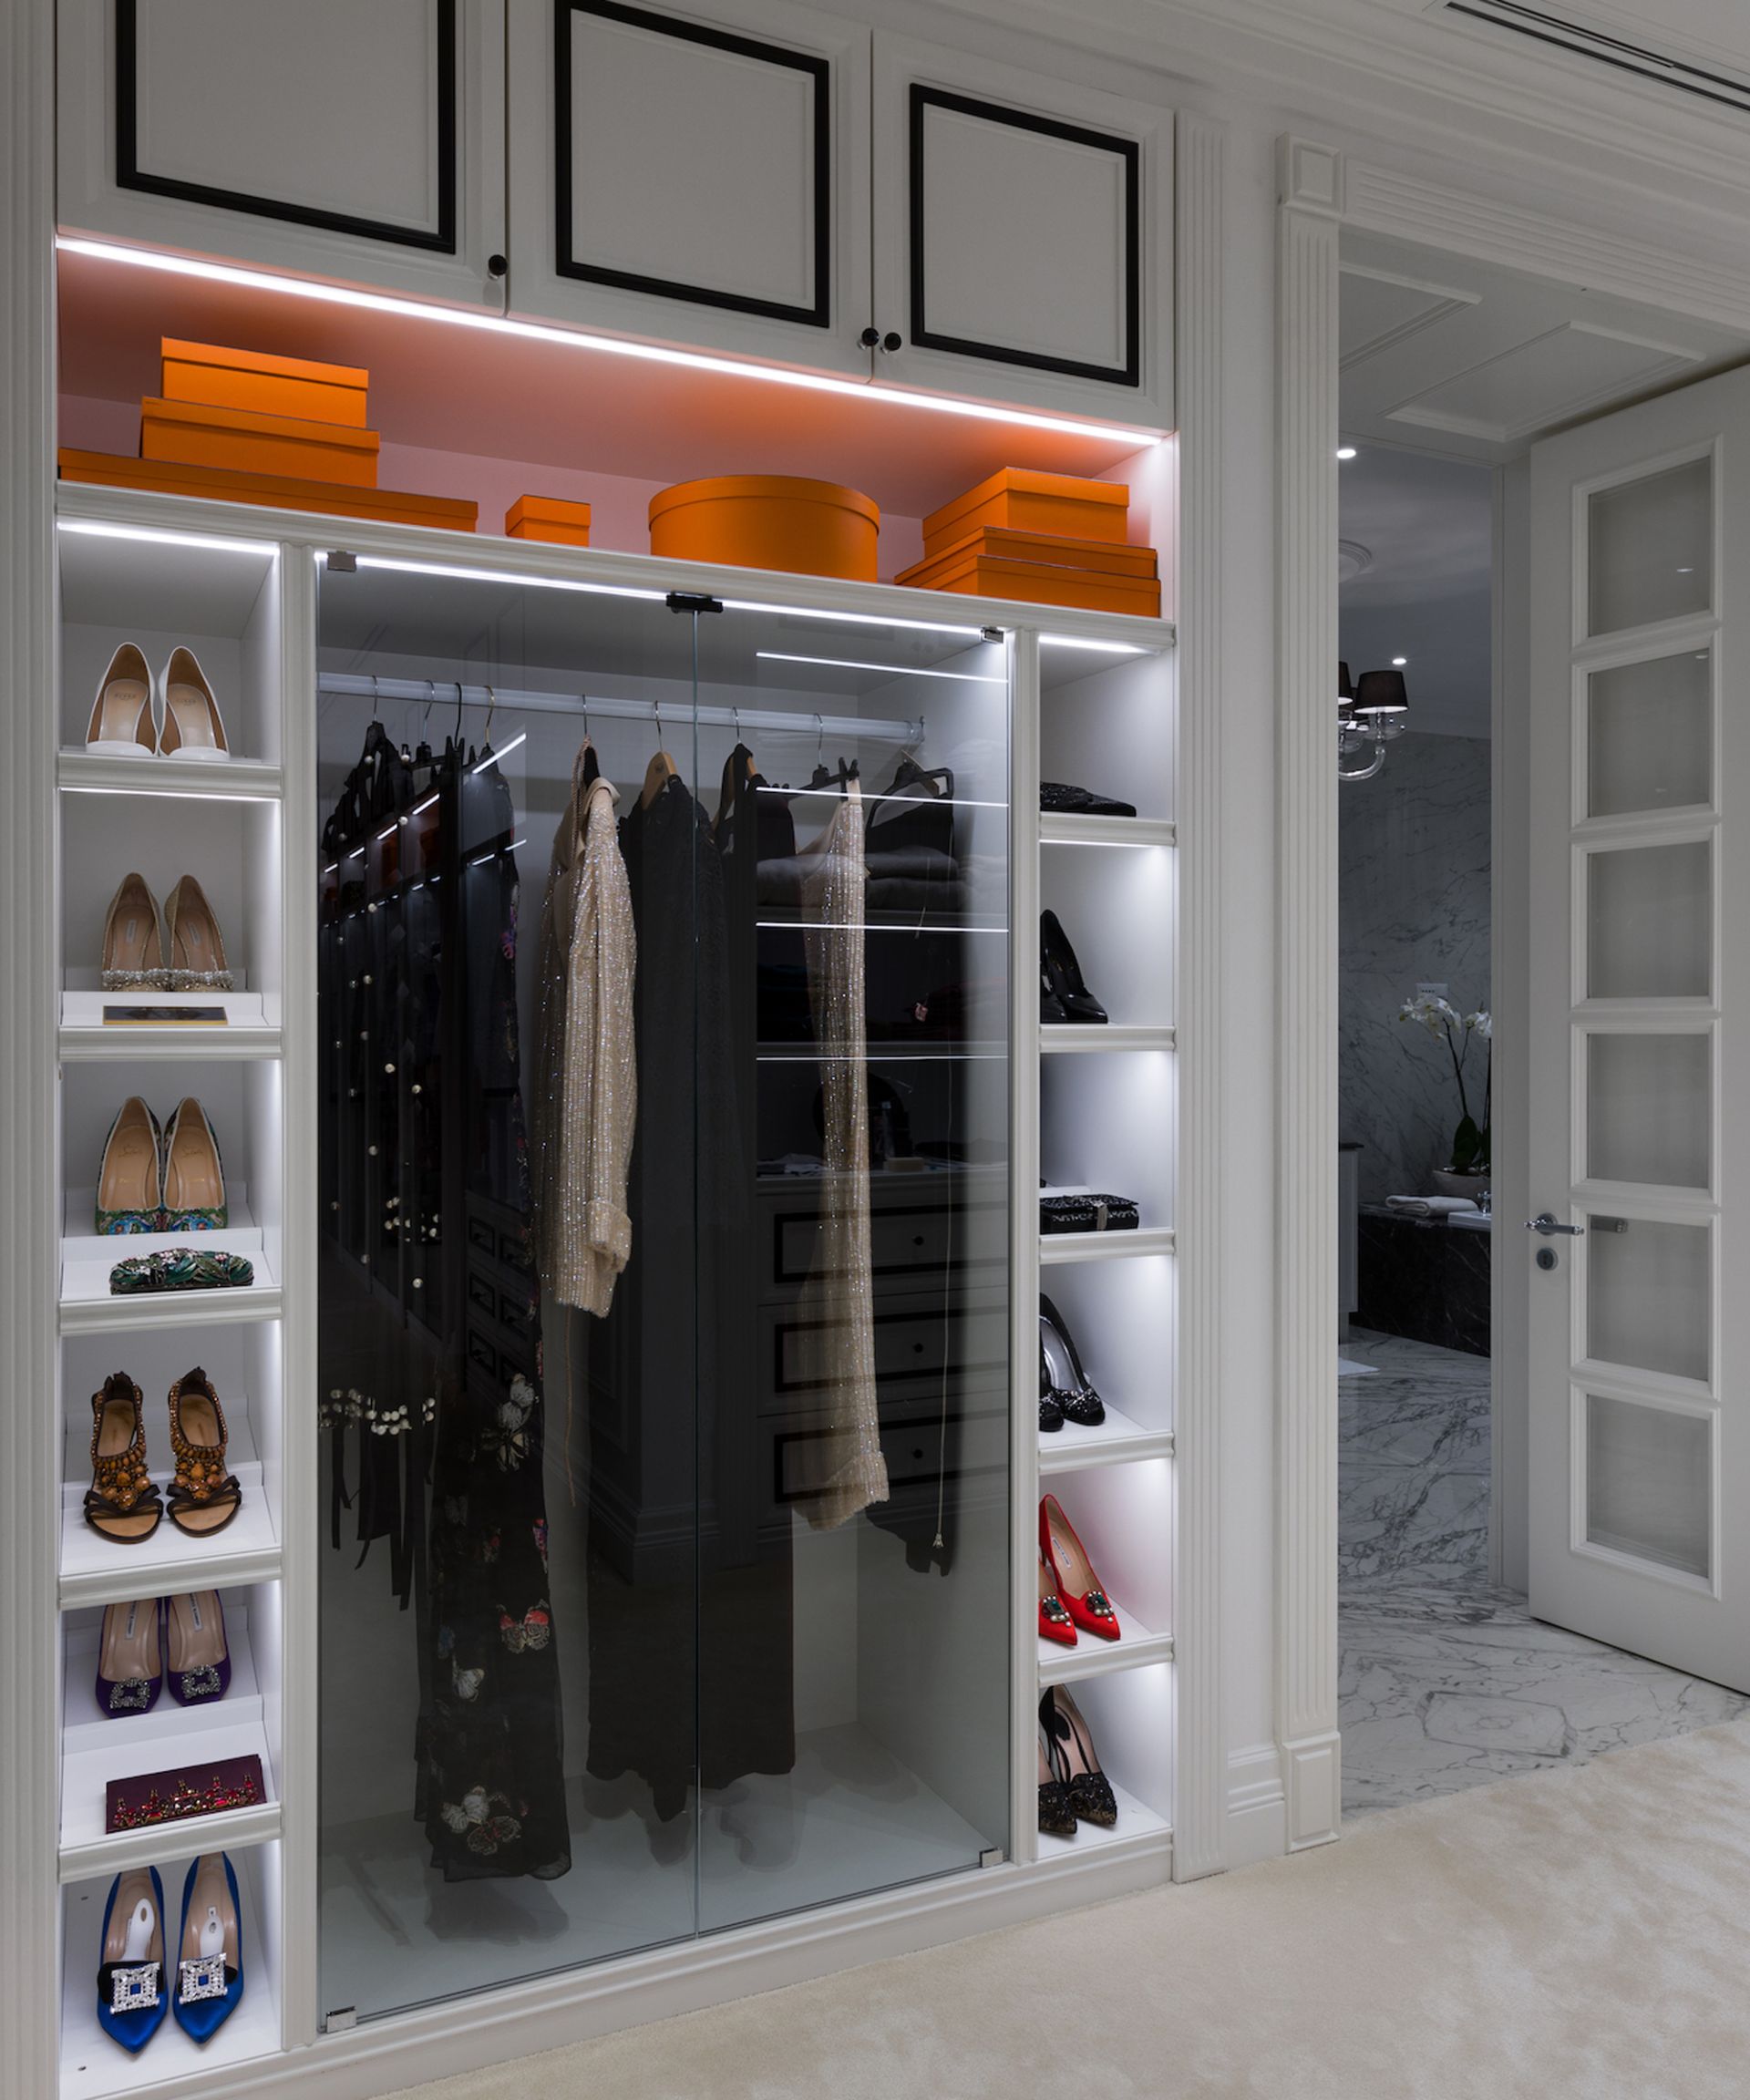 20 small walk-in closet ideas to organize clothes in even the tiniest ...